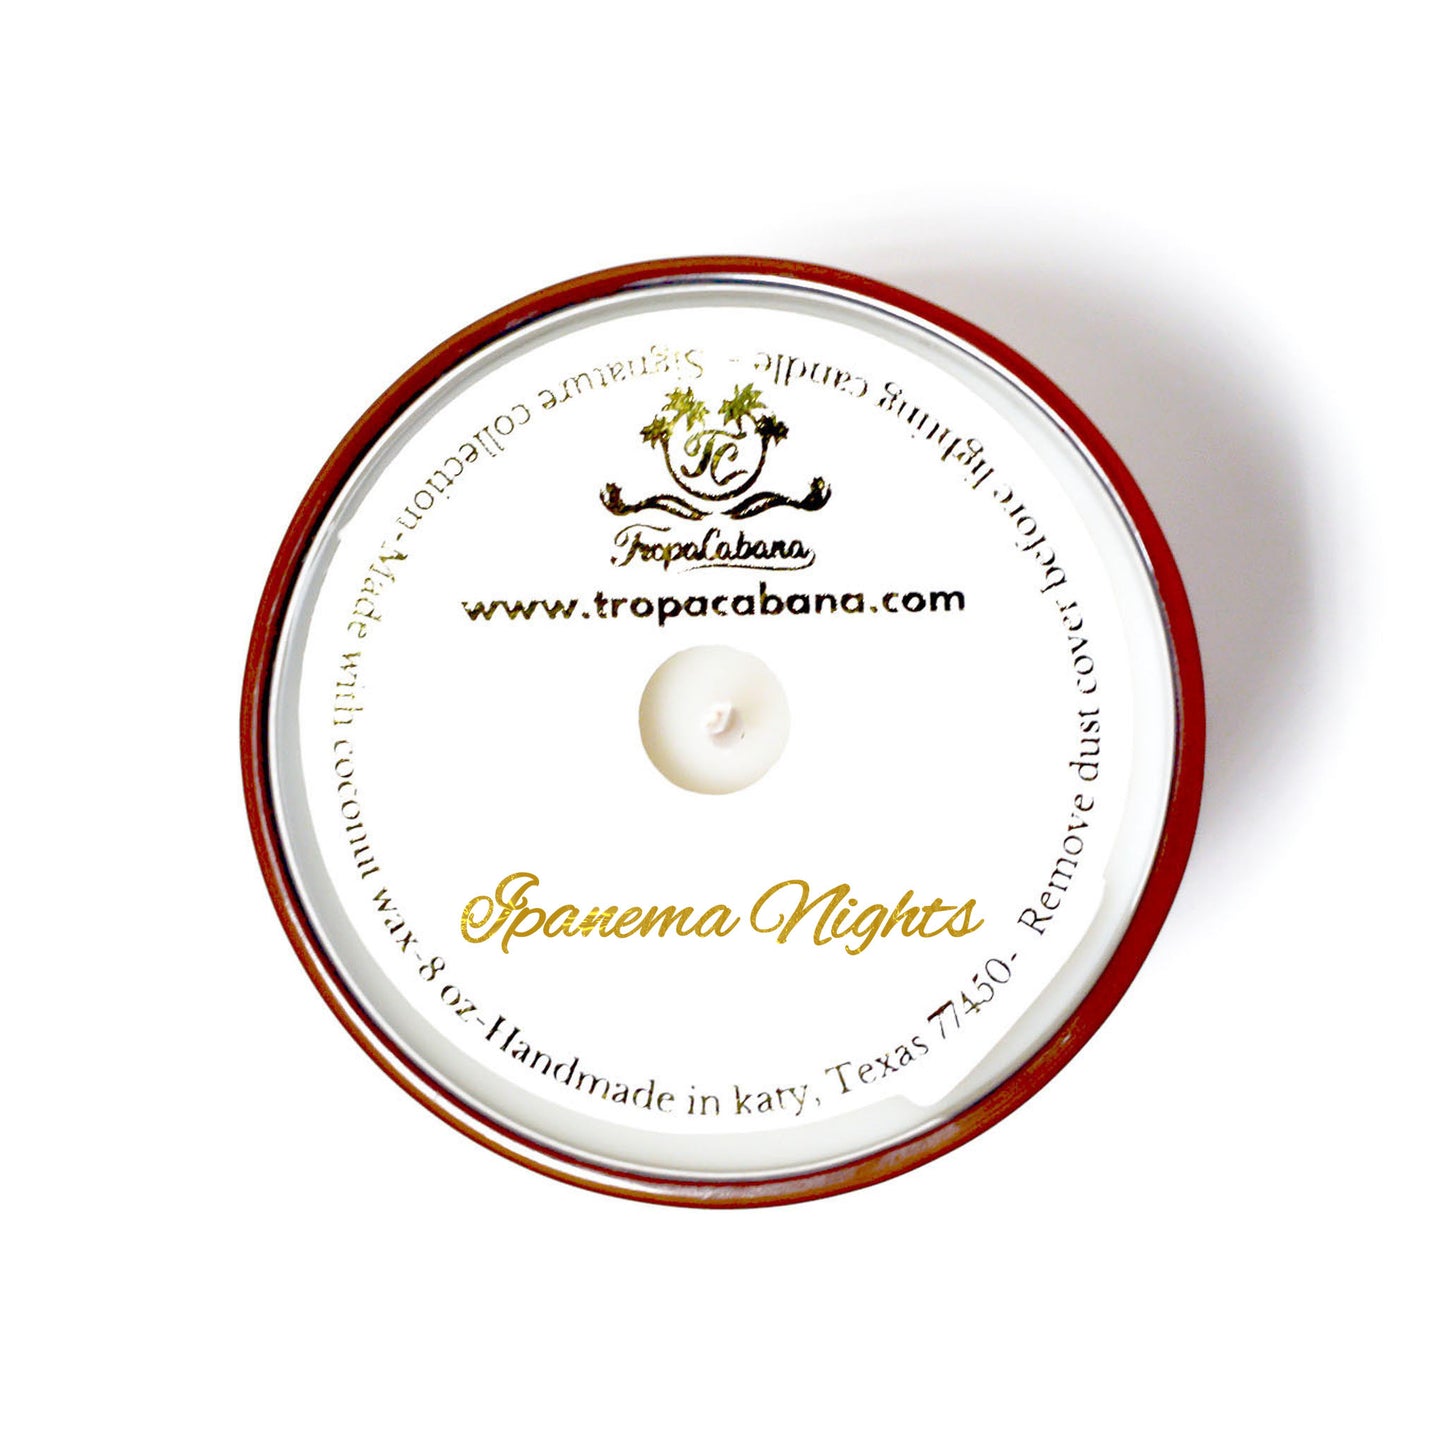 8 oz Ipanema Nights Candles, Signature Collection, Beach Fragrance, Rum Fragrance, Unisex, Gifts for Him, Gifts for her, Gifts for travelers, Special Occasion Gift, Luxury Candle, Vegan Candle, Coconut Wax Candle, Scented Candle, Aromatherapy, TropaCabana, Gold Glass Jar Candle, Made in the US, Vet Owned Business, Woman Owned Business, Brazilian Owned Business, Small Business, Support Local, Support Small, Handmade, Handpoured Candles.